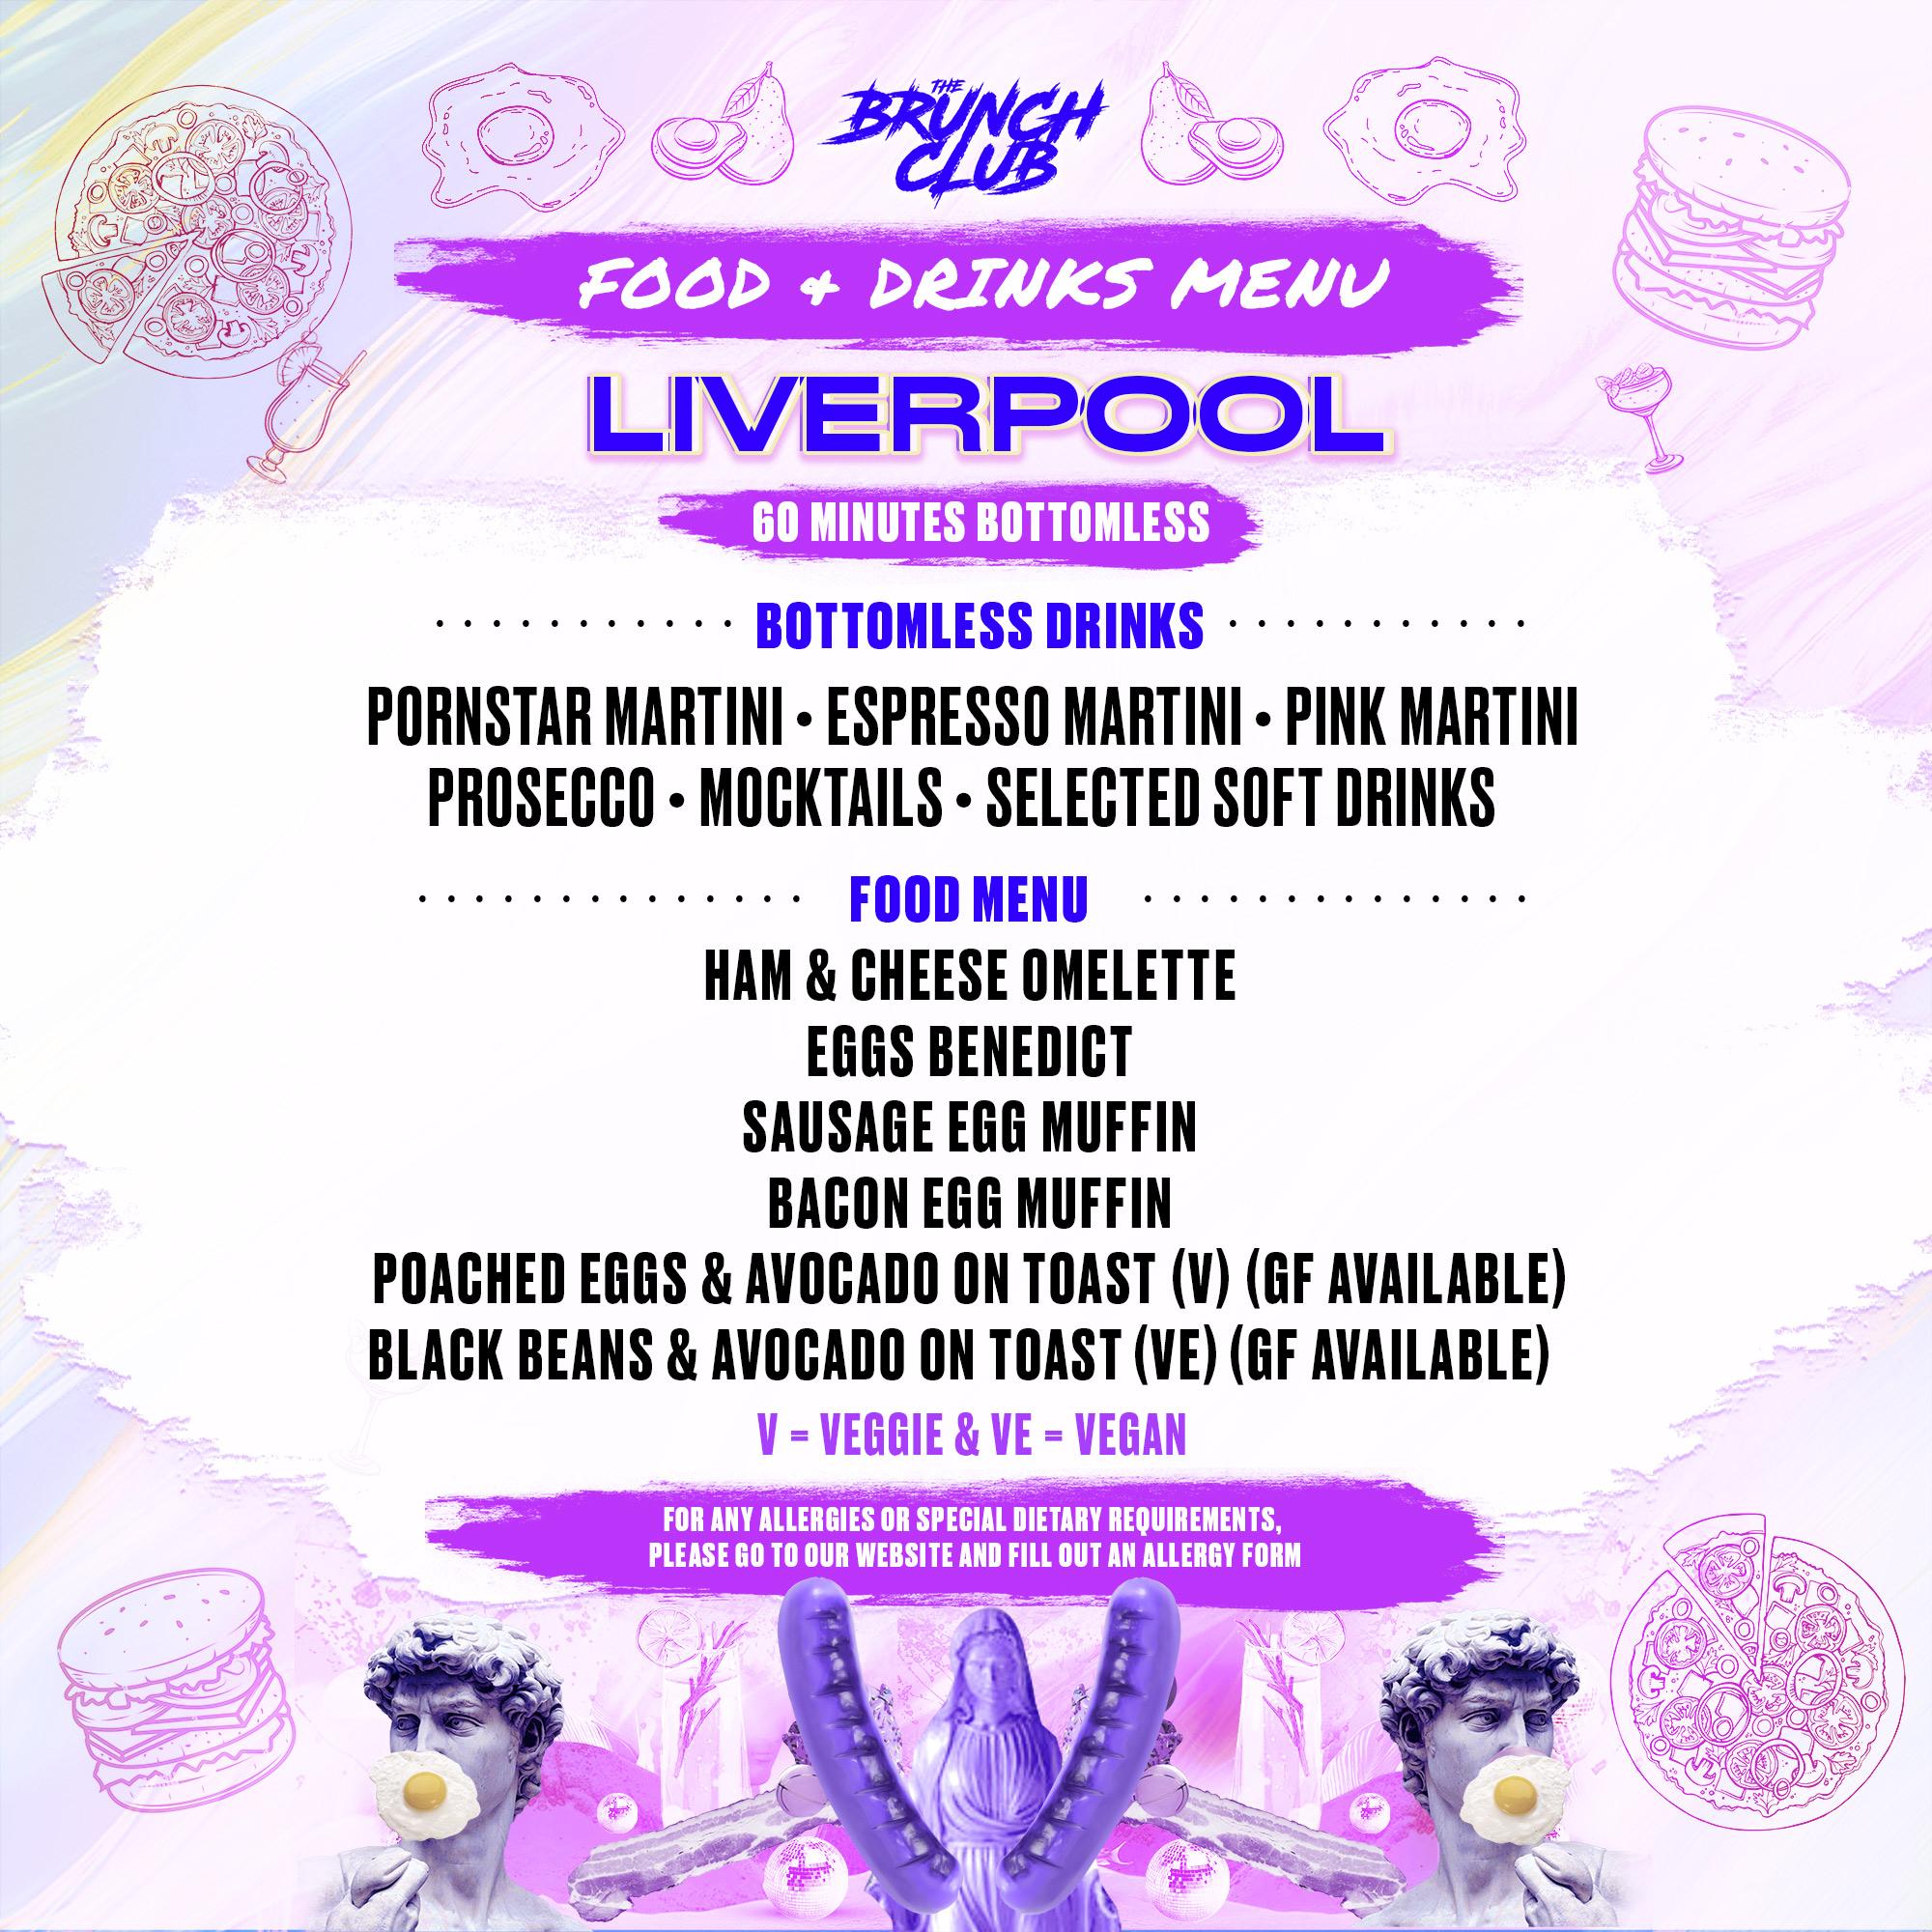 90's Baby Bottomless Brunch - Liverpool